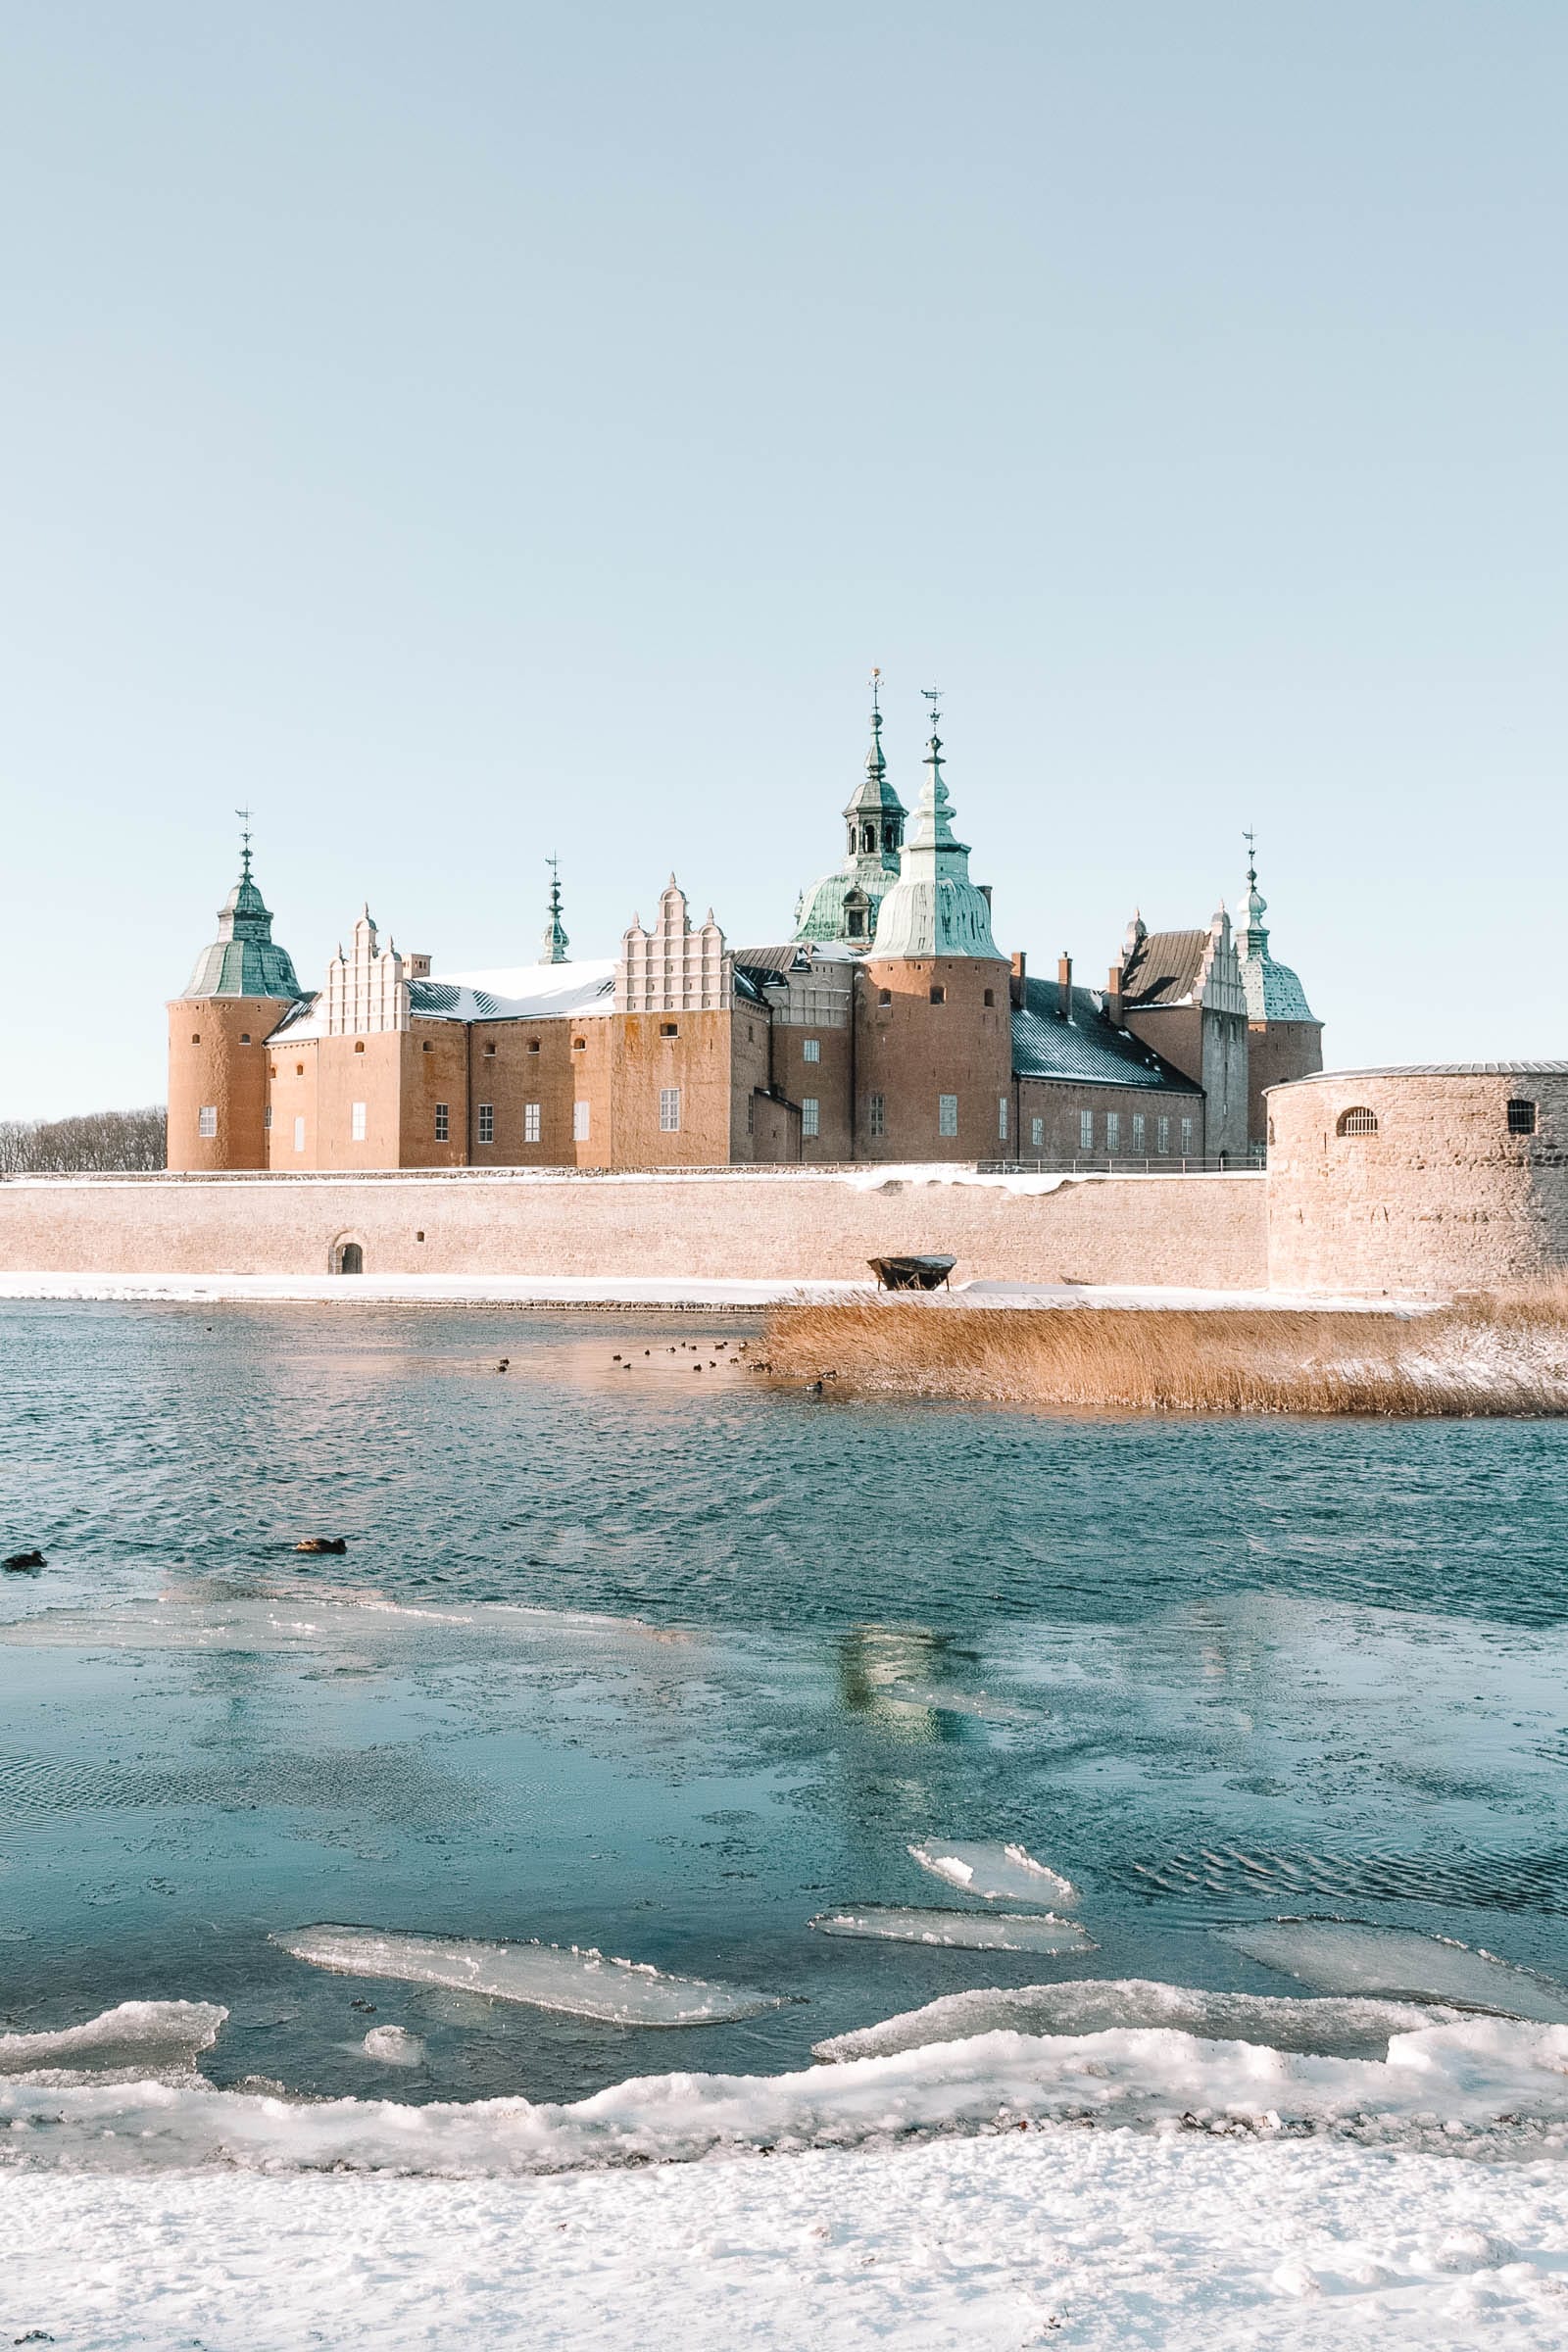 The Best 11 Fortresses and Castles near Gothenburg To Visit - Katiesaway